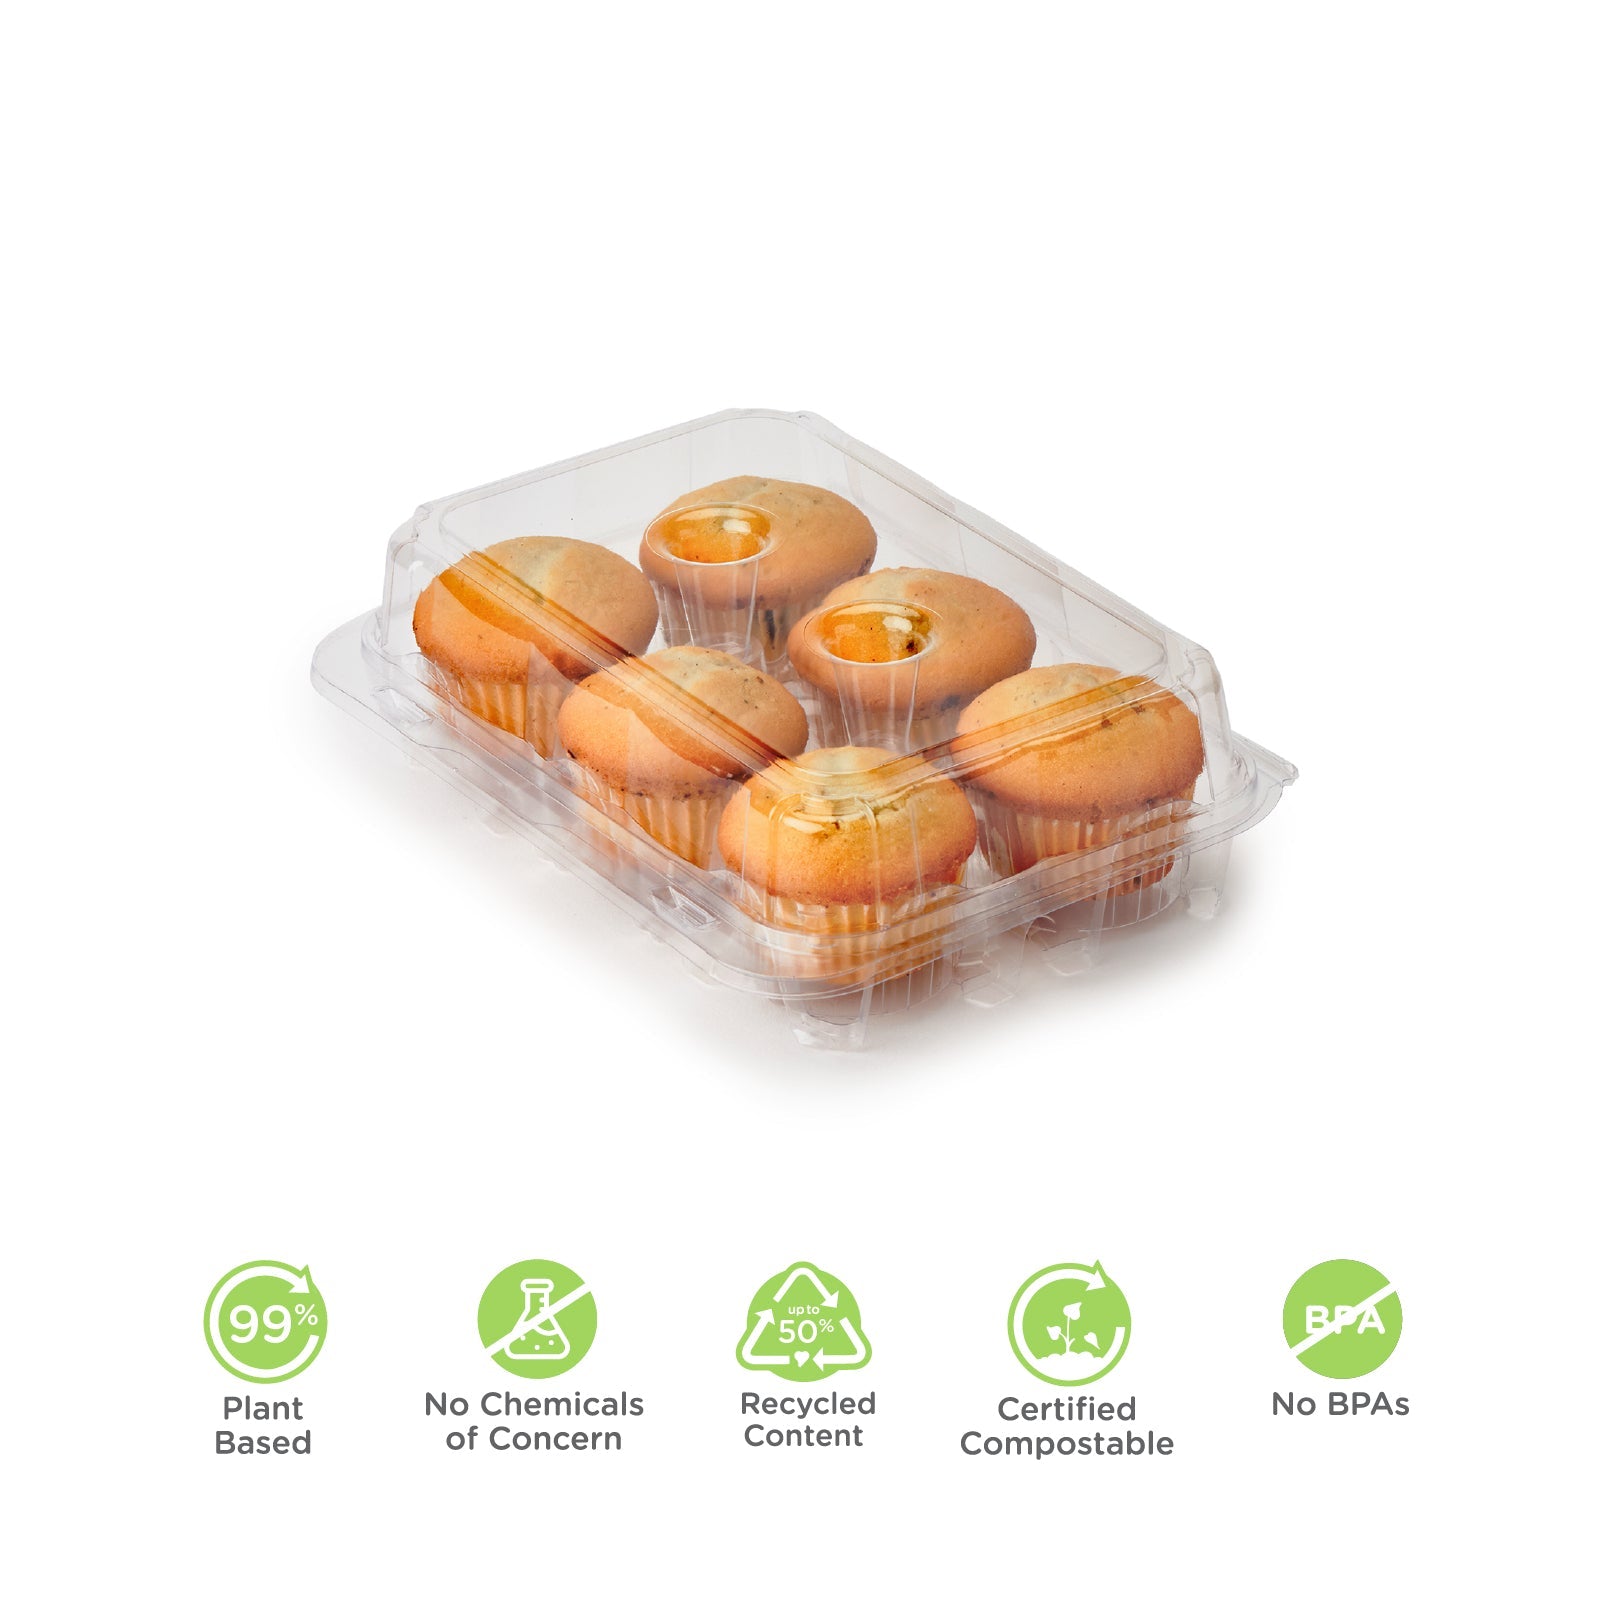 Clear PET Clamshell Cupcake & Muffin Containers